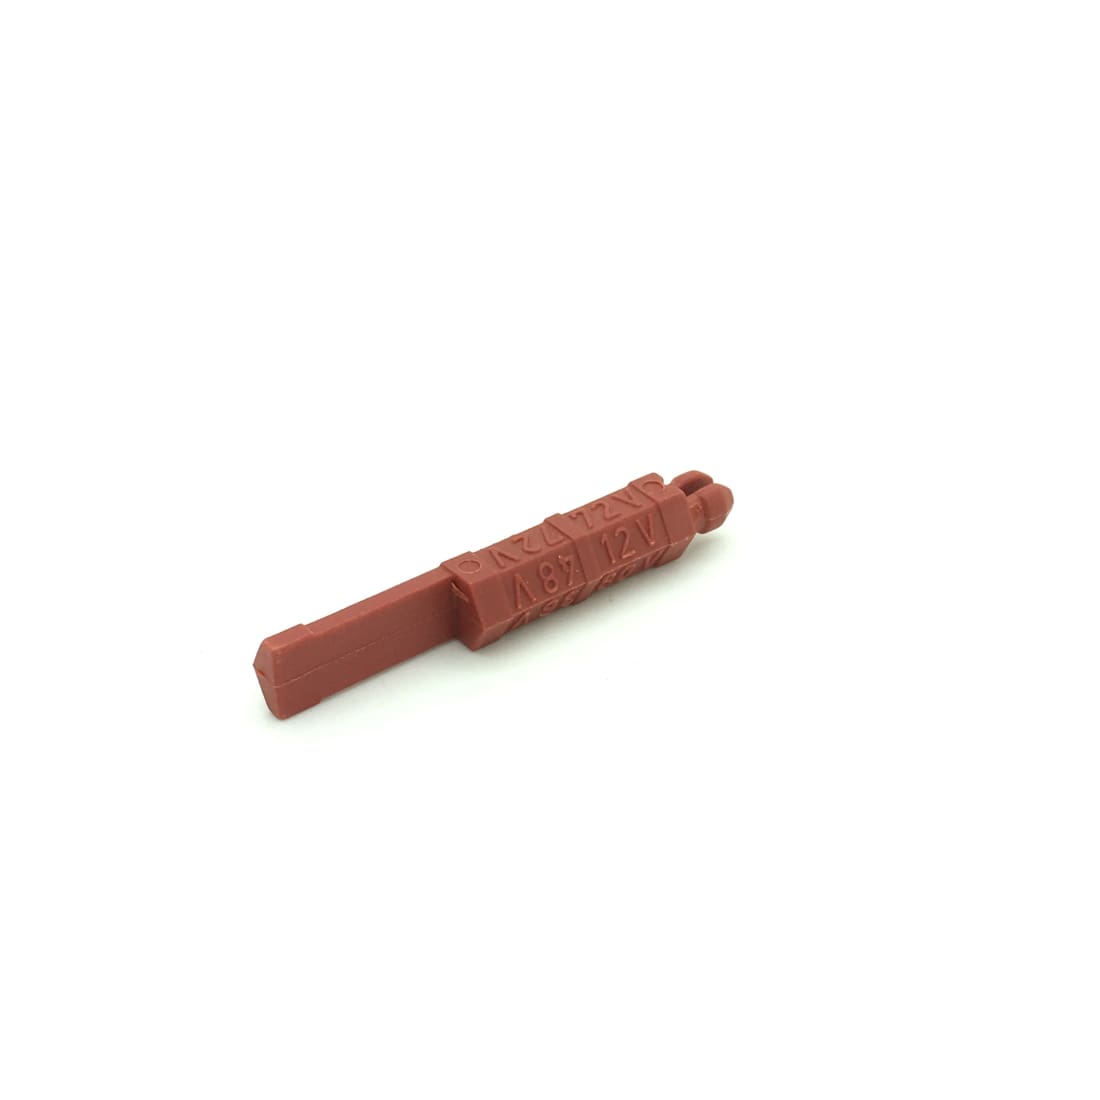 Rema ft80 coding pin red €2.99 - www.oemnordic.com– OEM NORDIC